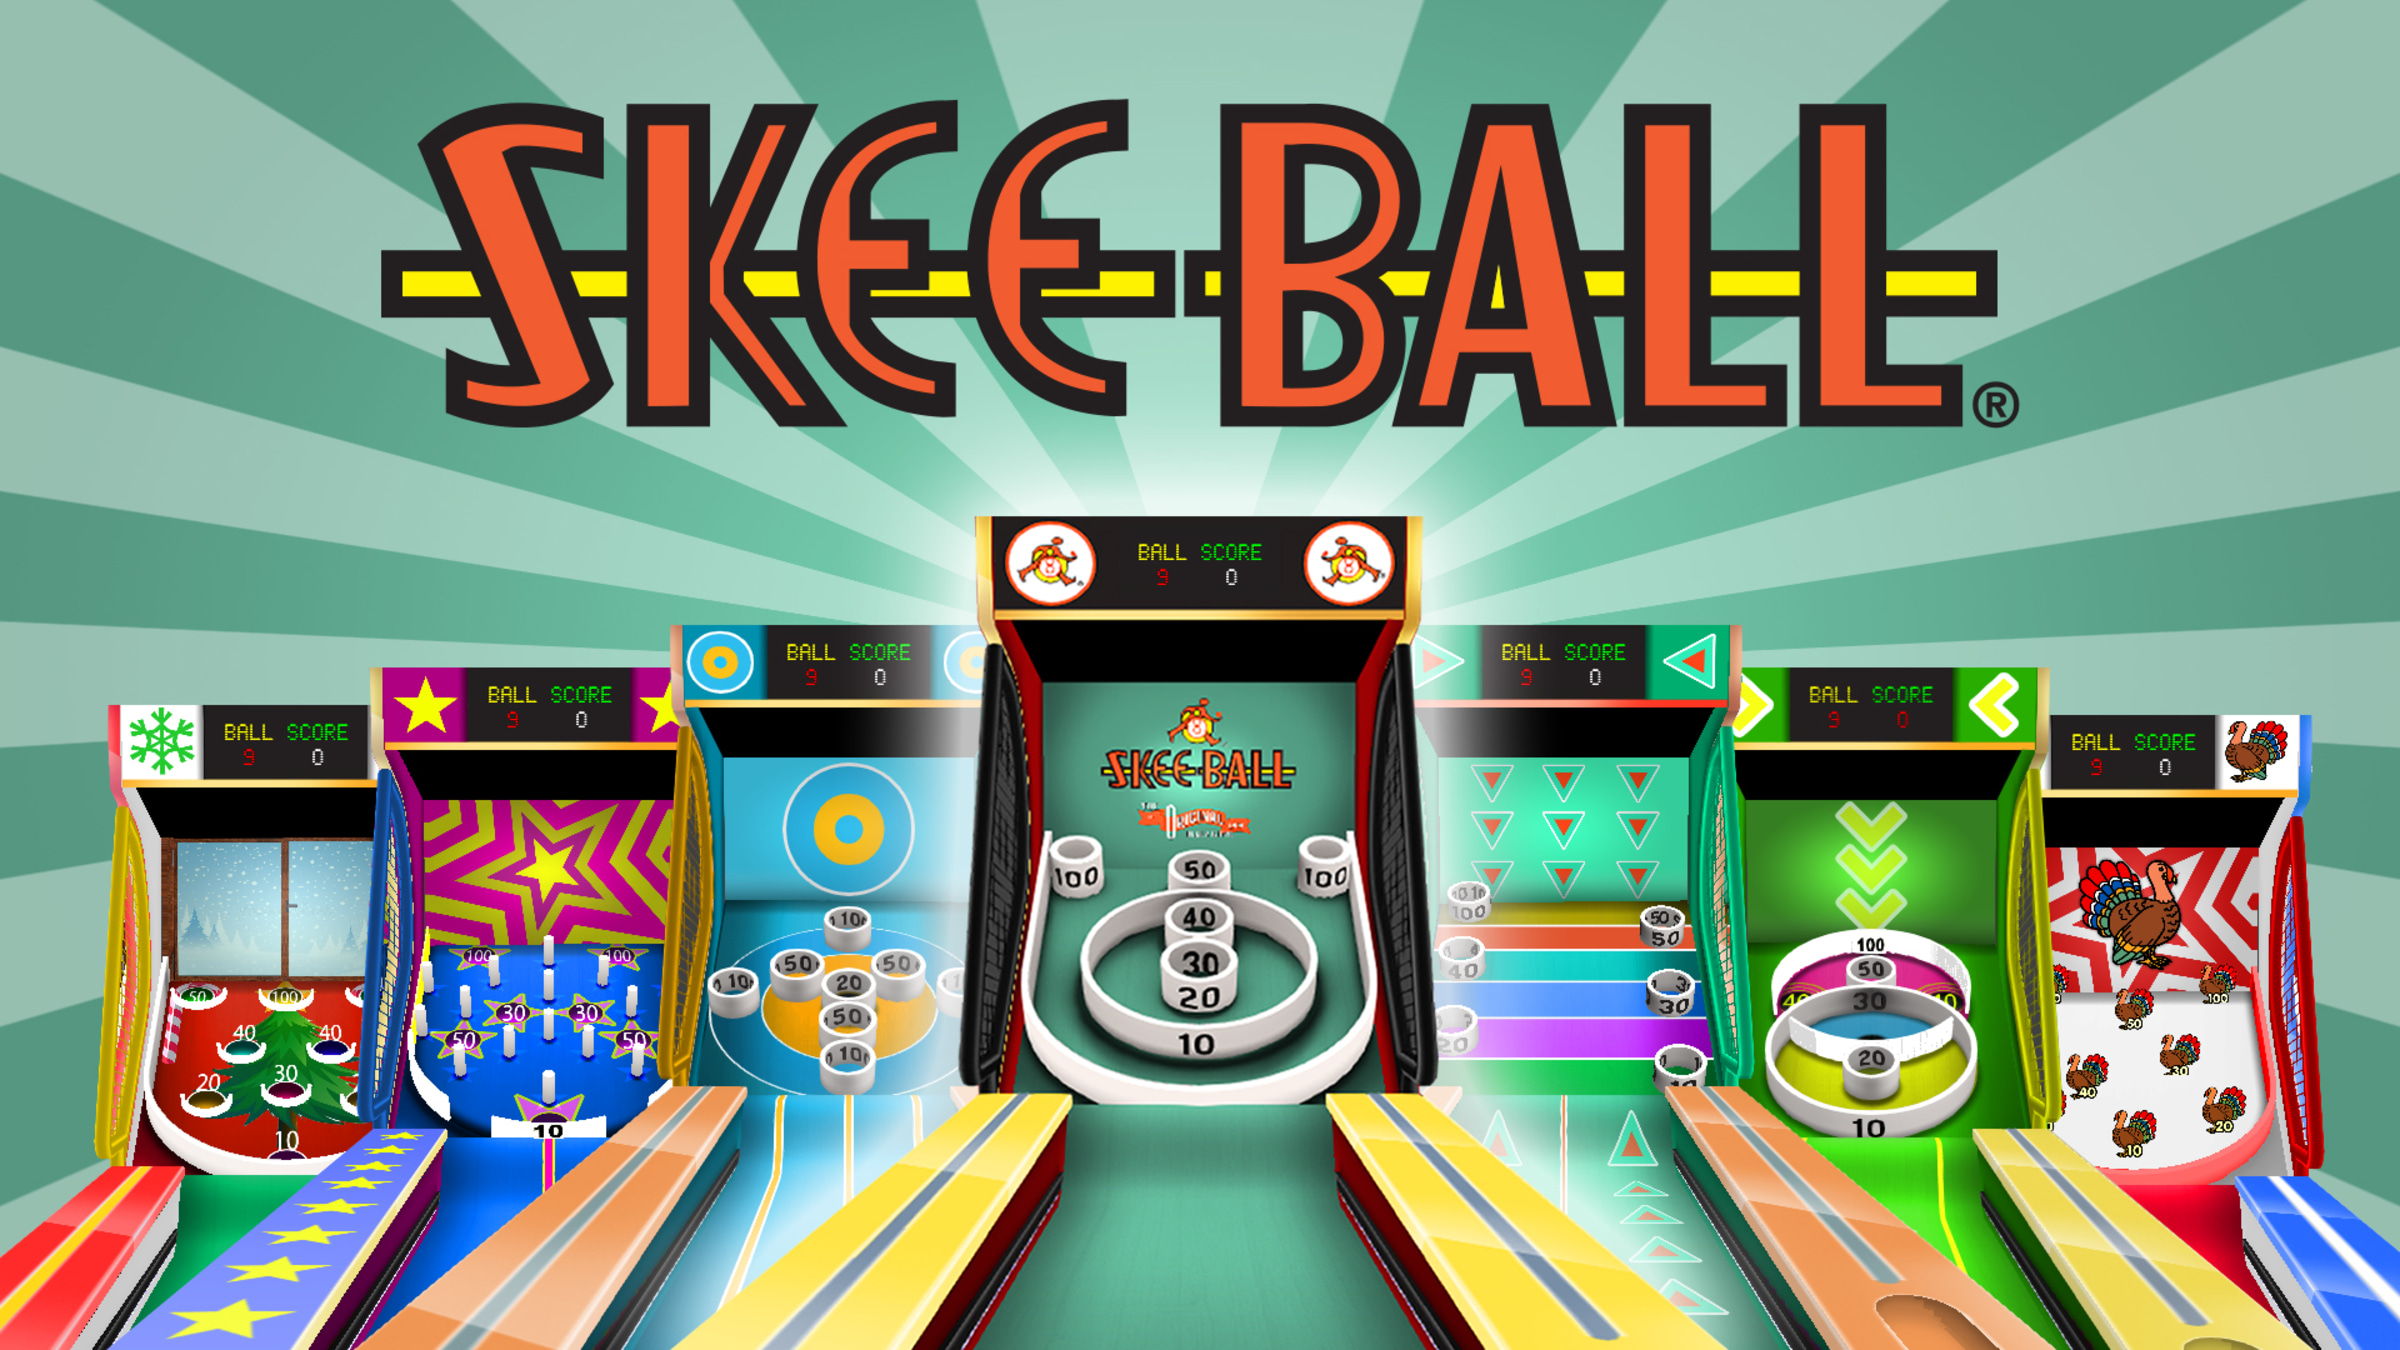 Skee-Ball for Nintendo Switch